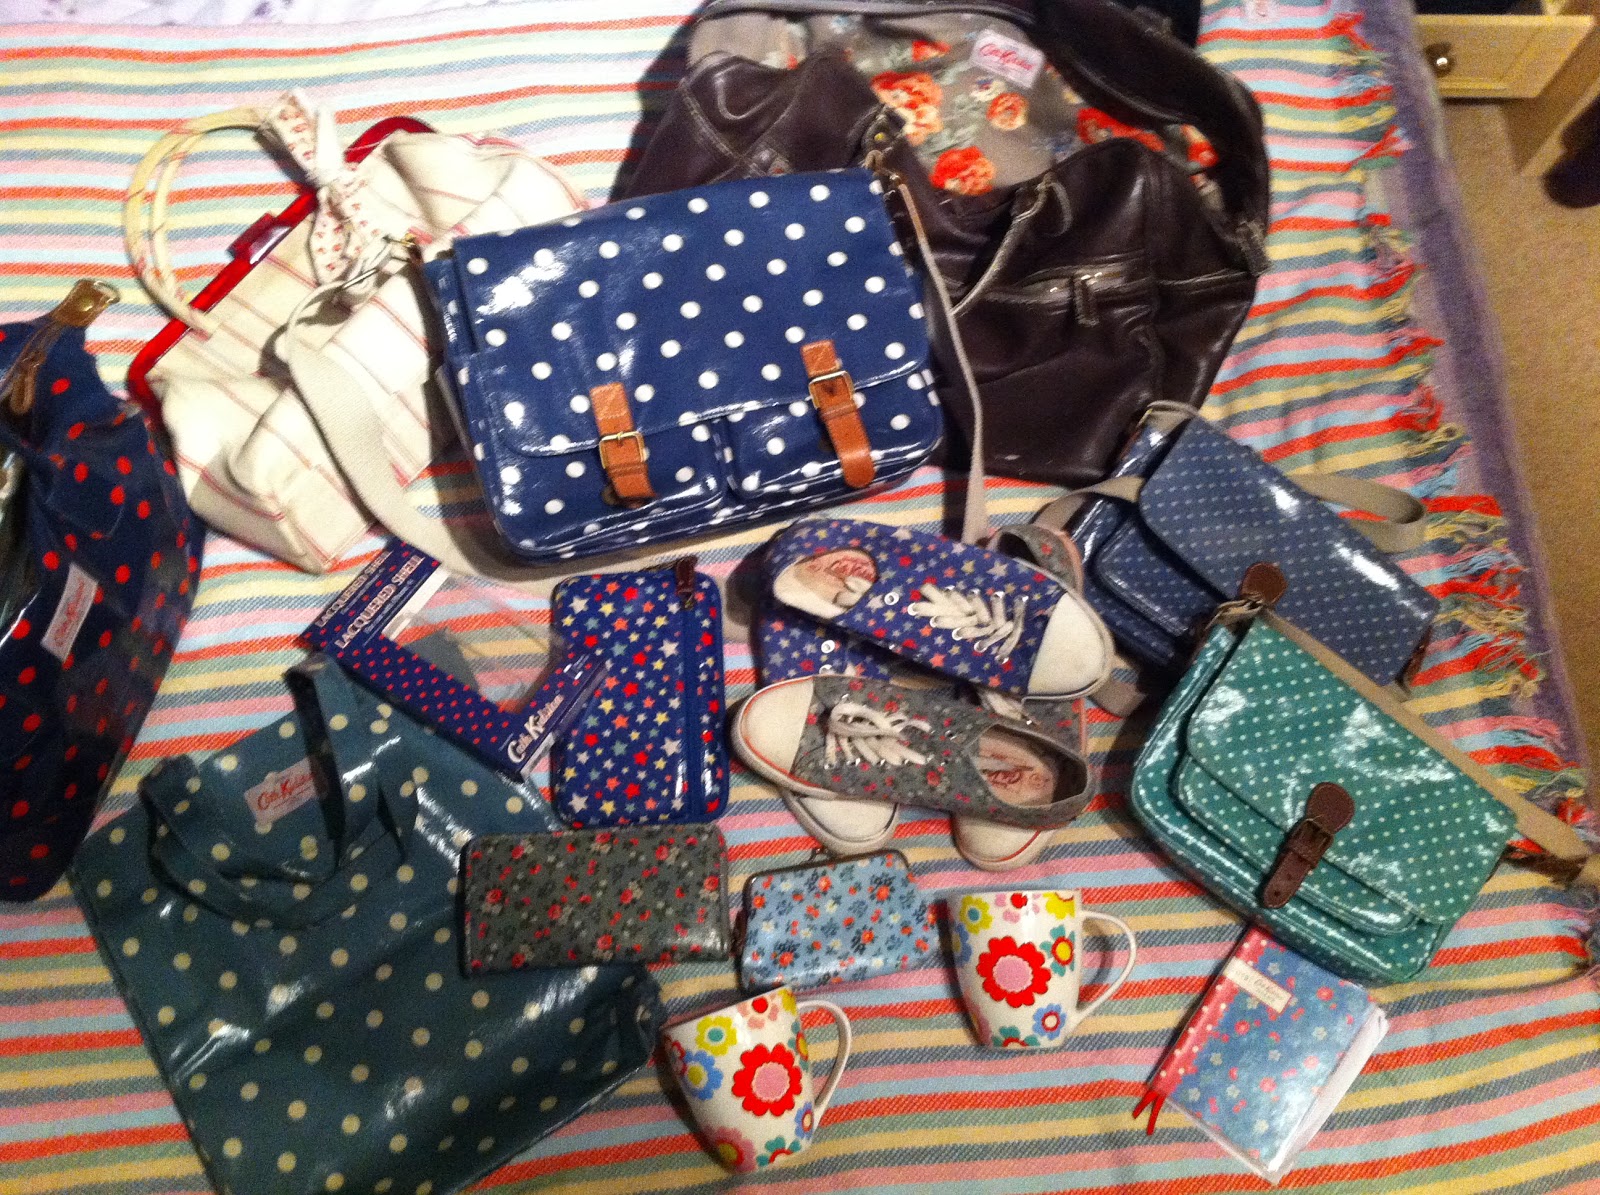 cath kidston collection